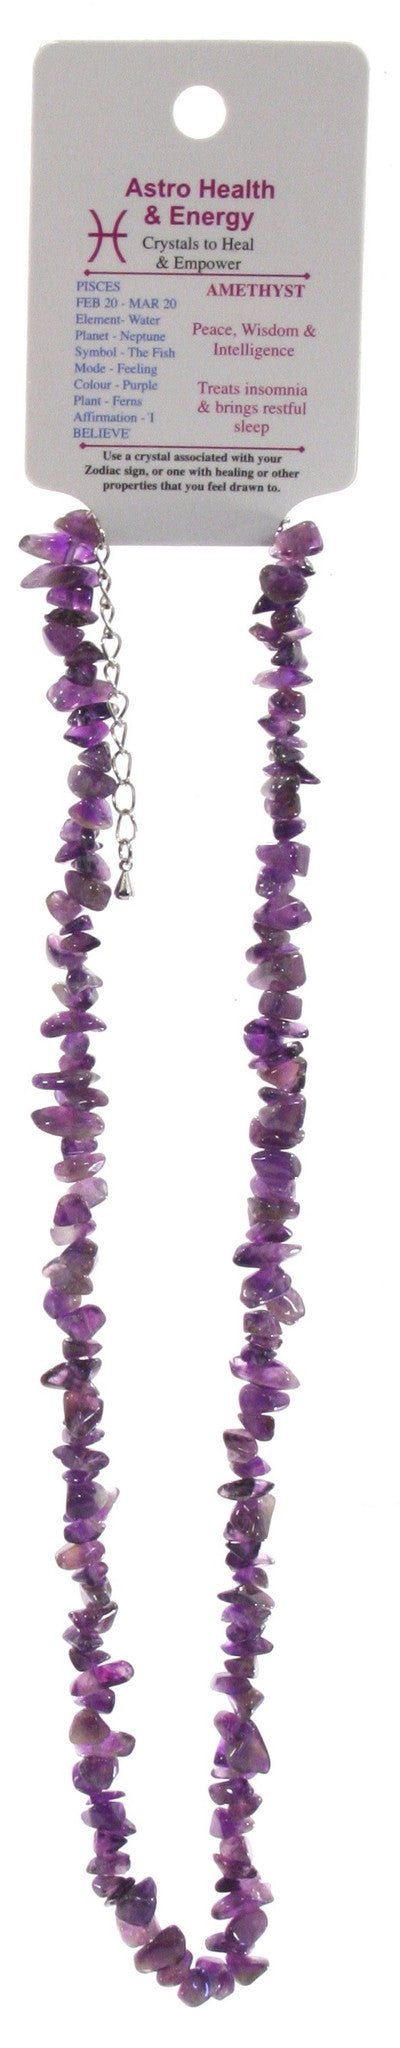 Amethyst Crystal Chip Horoscope Necklace - Star Sign Pisces